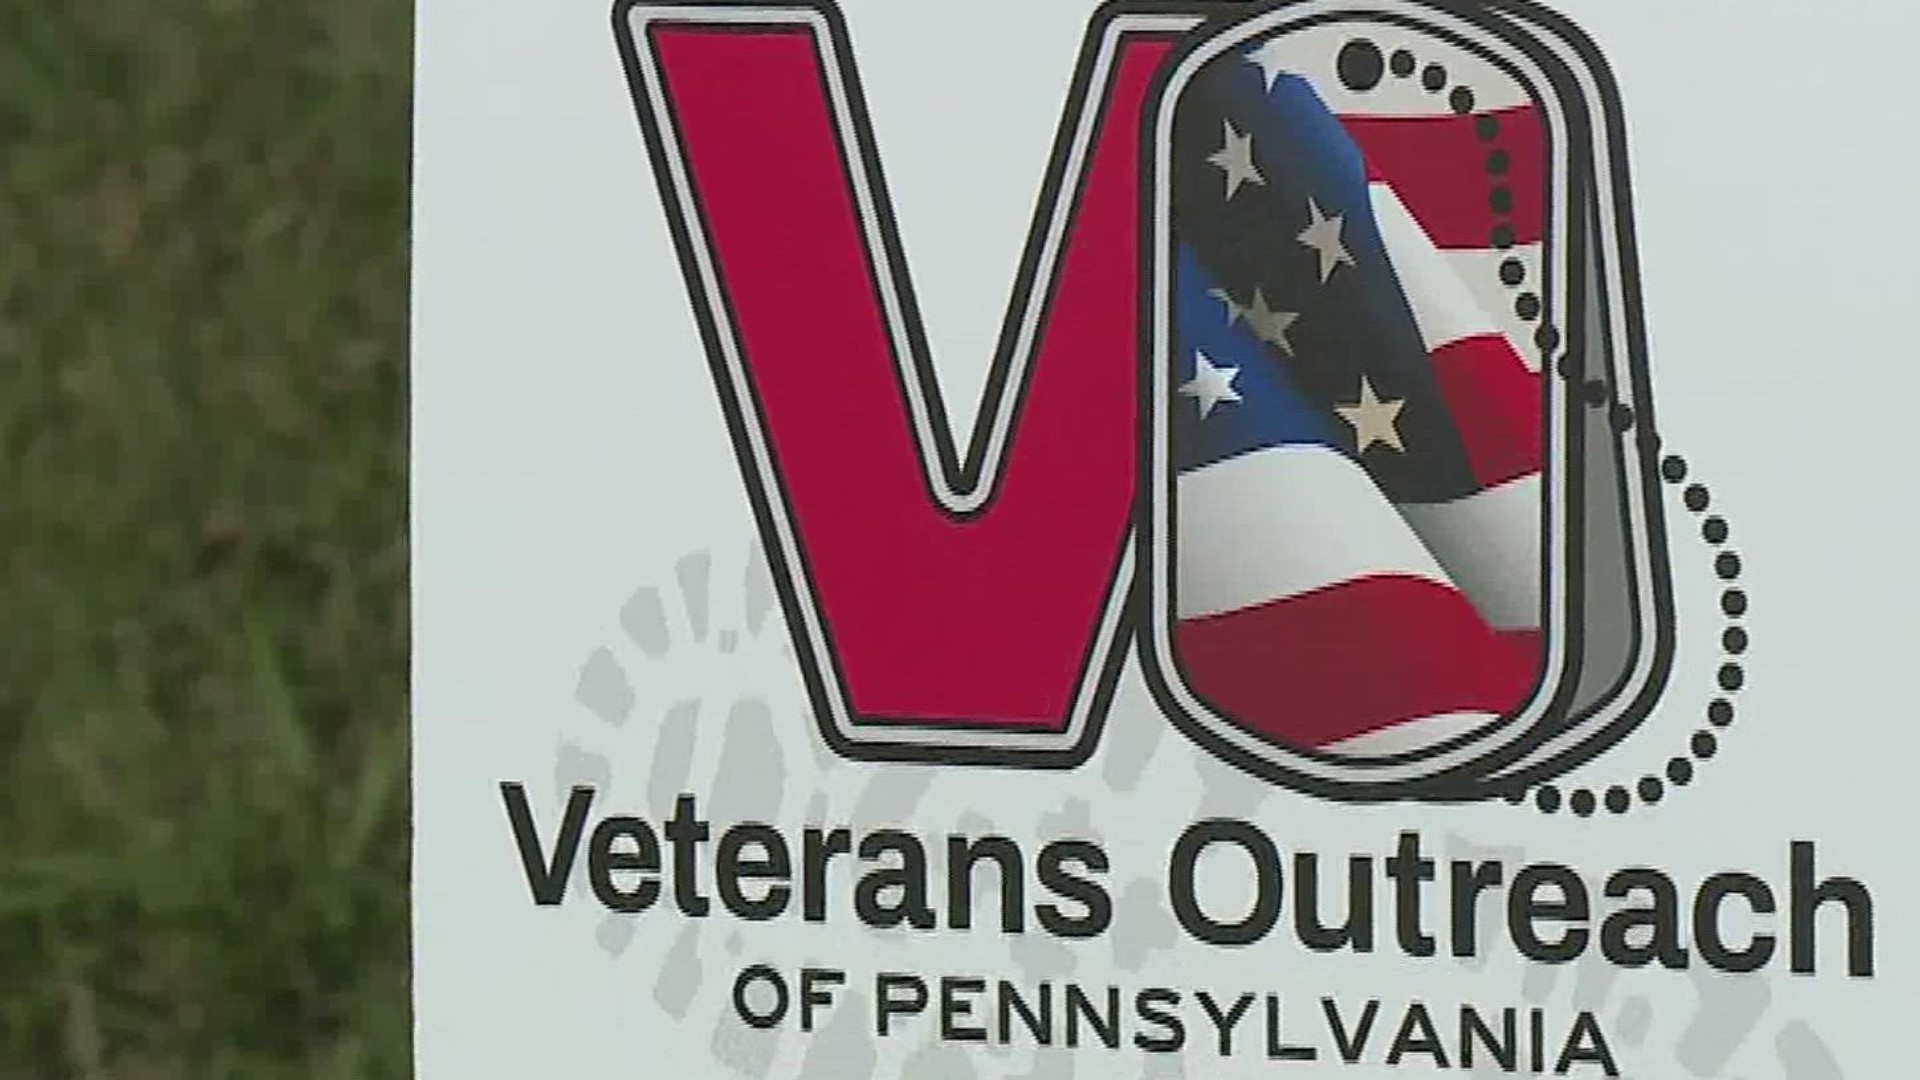 Veterans Outreach of Pennsylvania hopes to help veterans struggling with homelessness by building temporary housing.